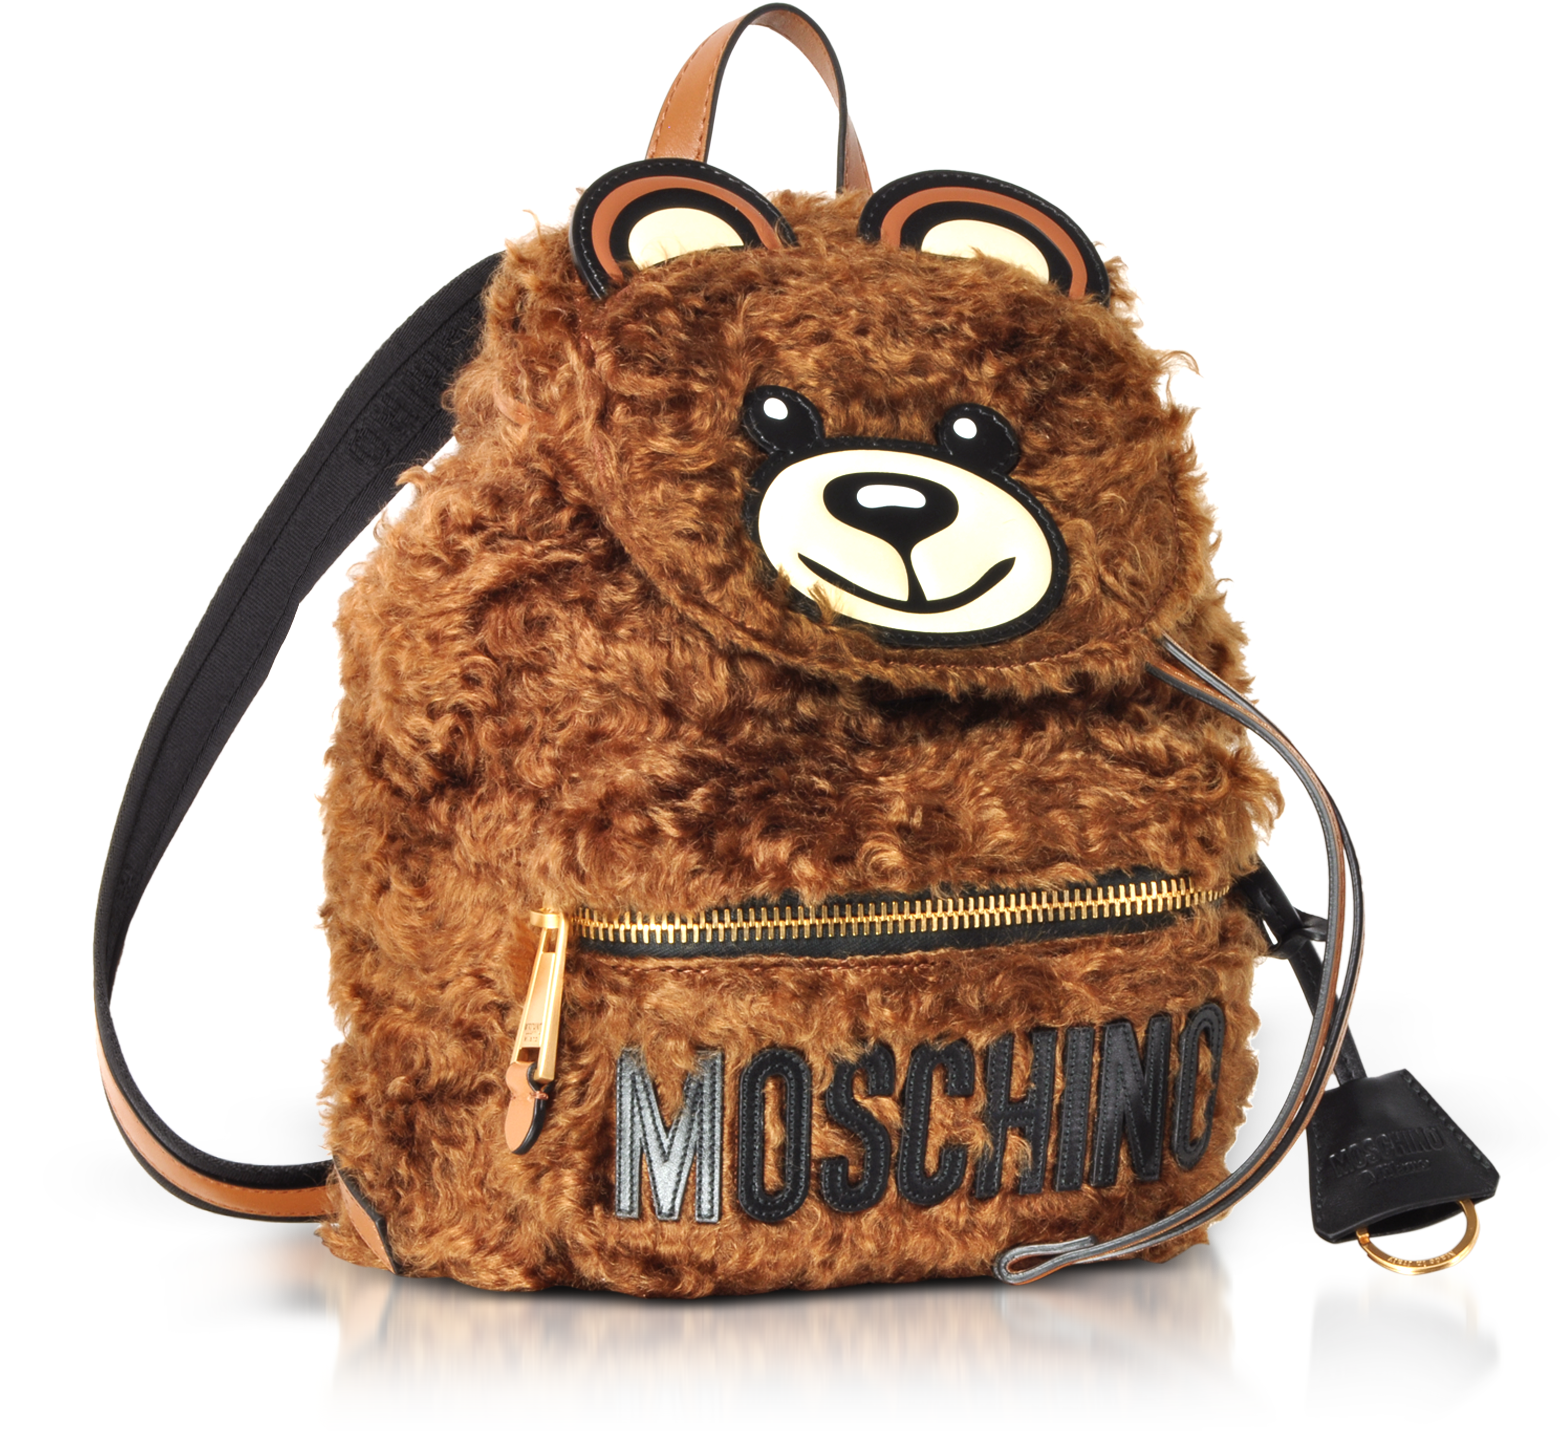 Moschino Plush Teddy Bear Backpack in Brown